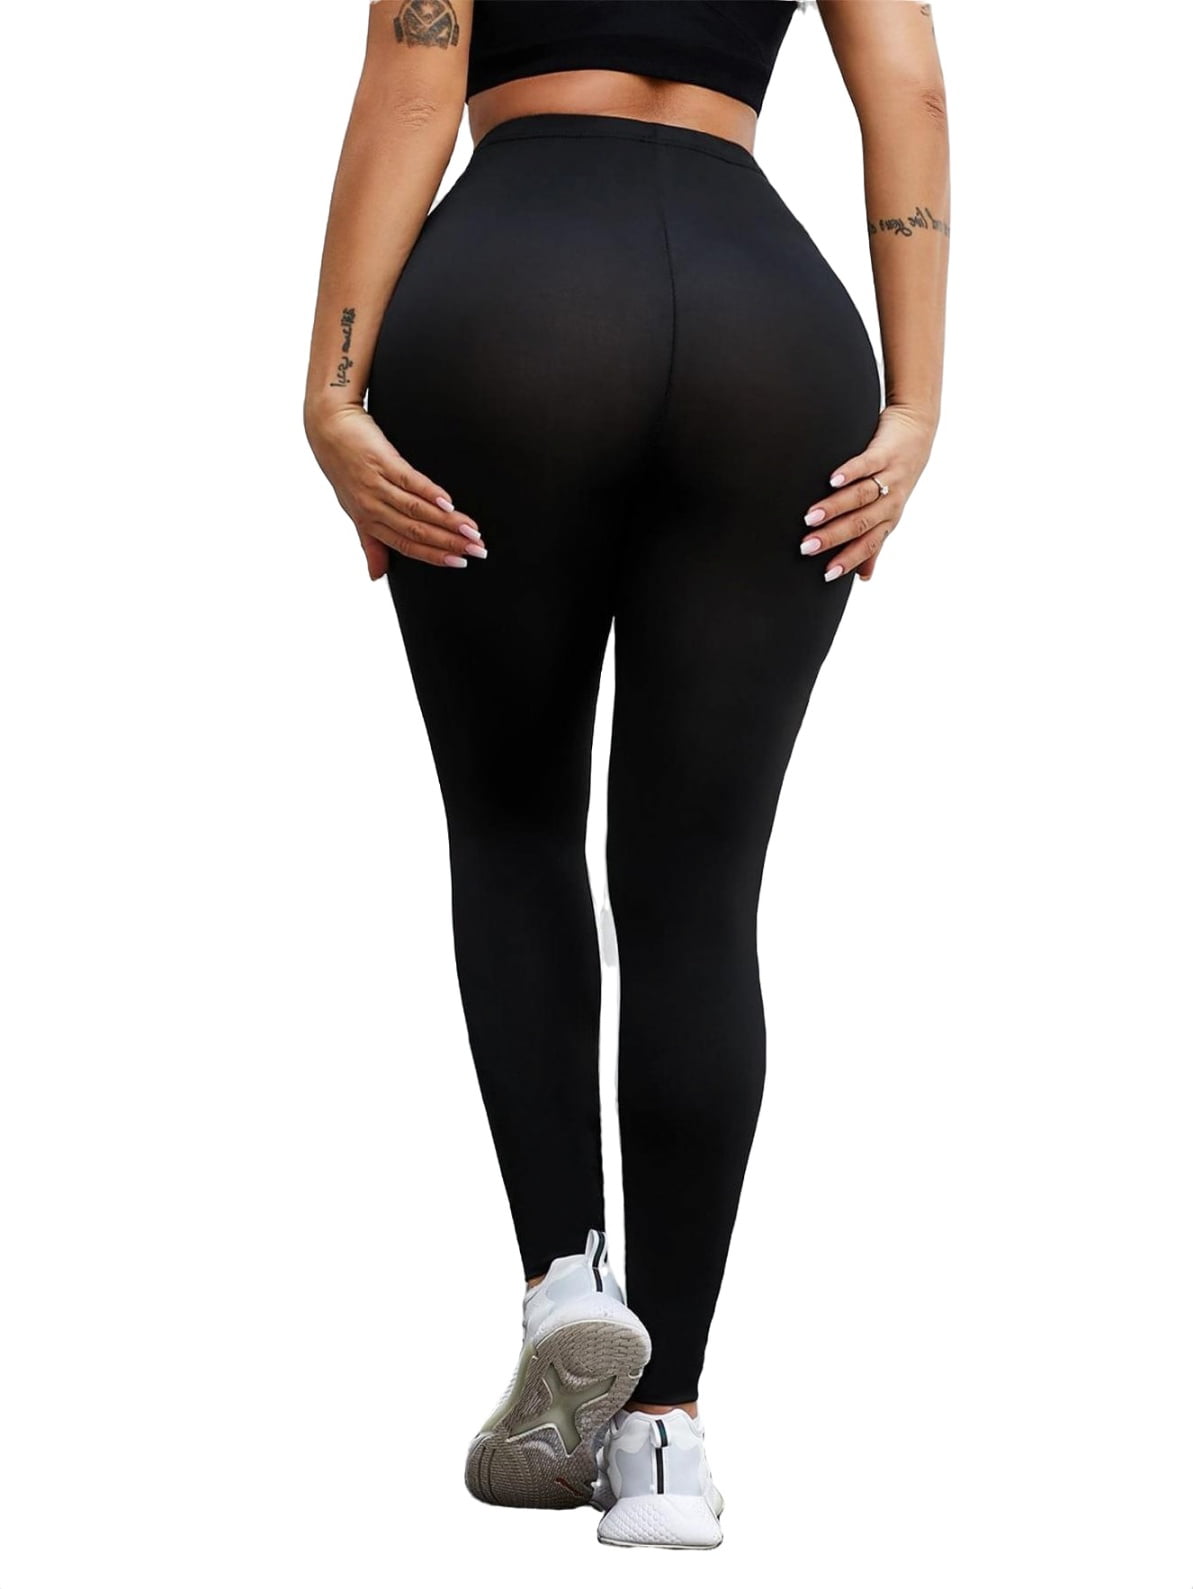 Ladies sexy new Tight Ripped Leggings🌲🌲🌲